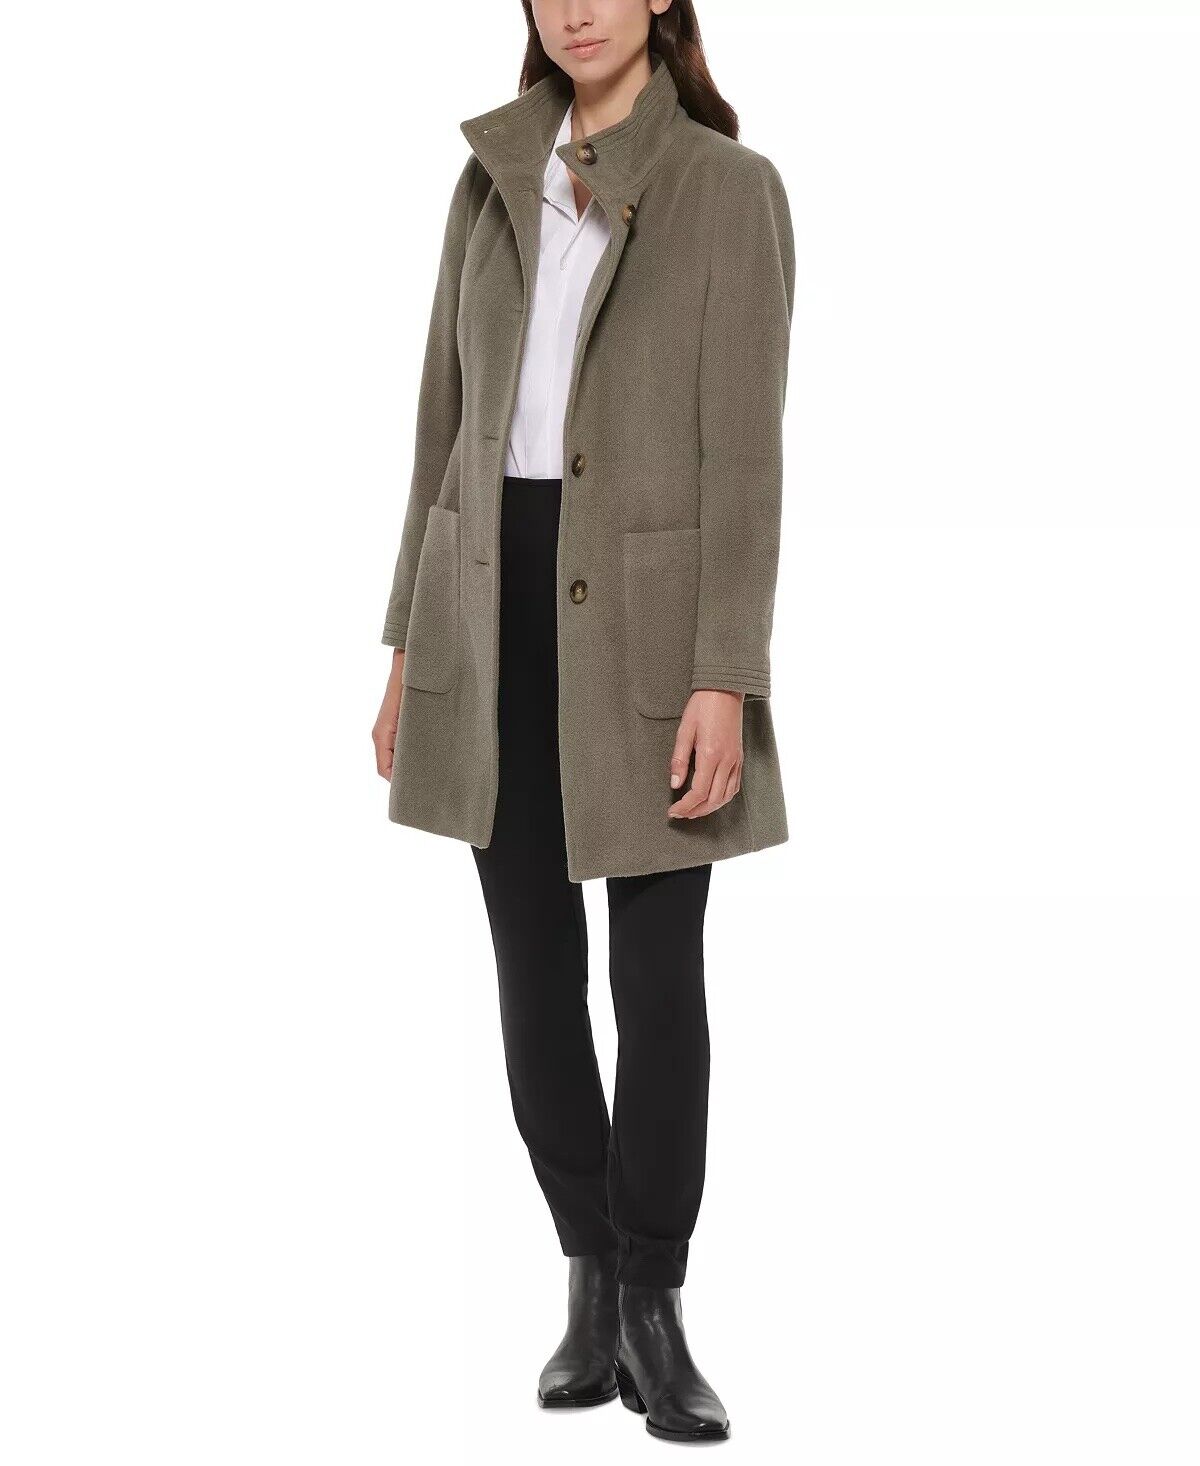 DKNY Women's Stand-Collar Button-Front Belted Coat Sage Green XL